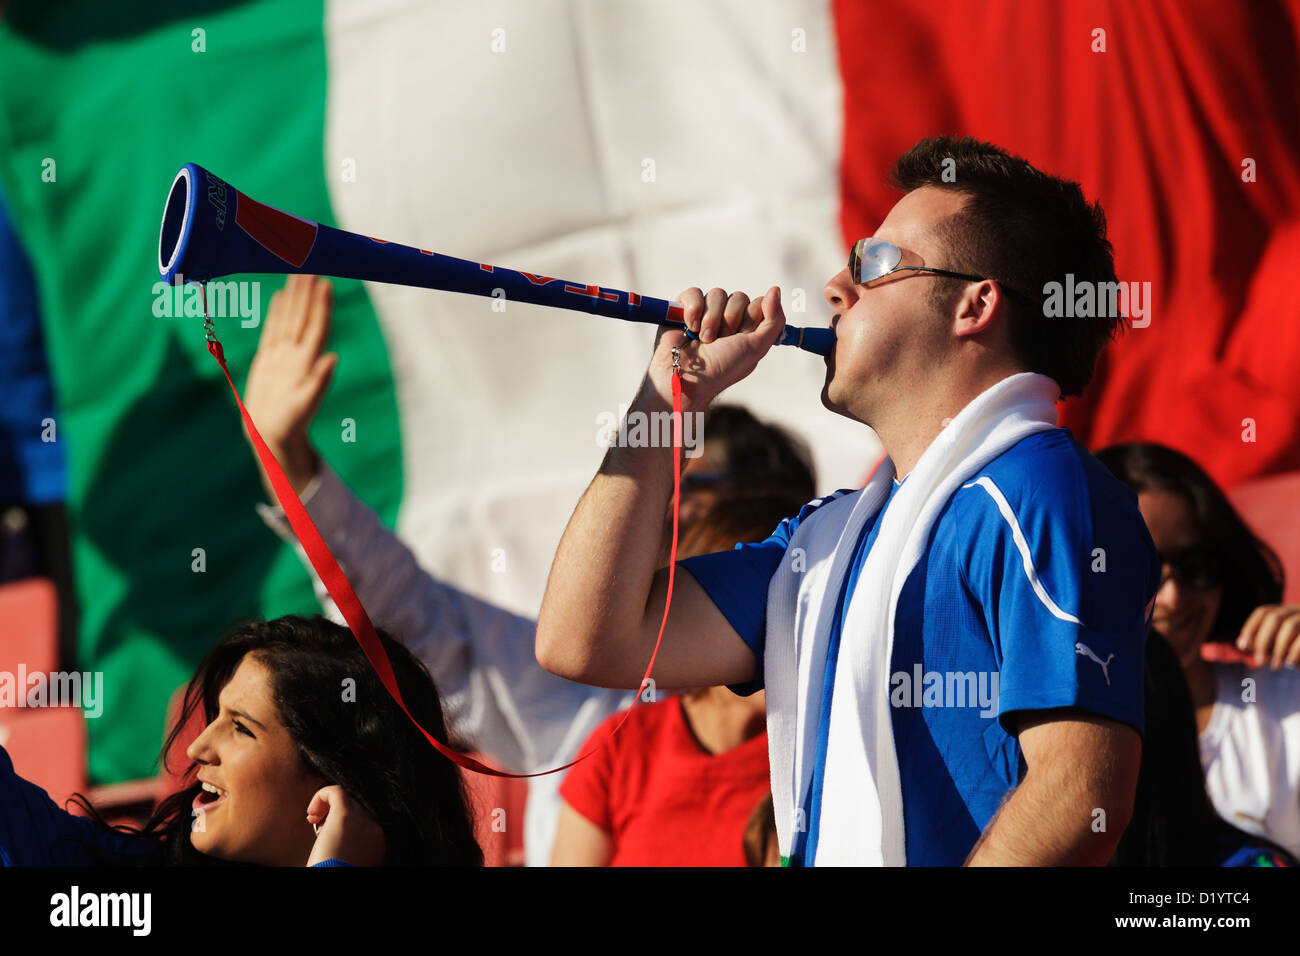 https://c8.alamy.com/comp/D1YTC4/an-italy-supporter-blows-a-vuvuzela-at-the-fifa-world-cup-group-f-D1YTC4.jpg